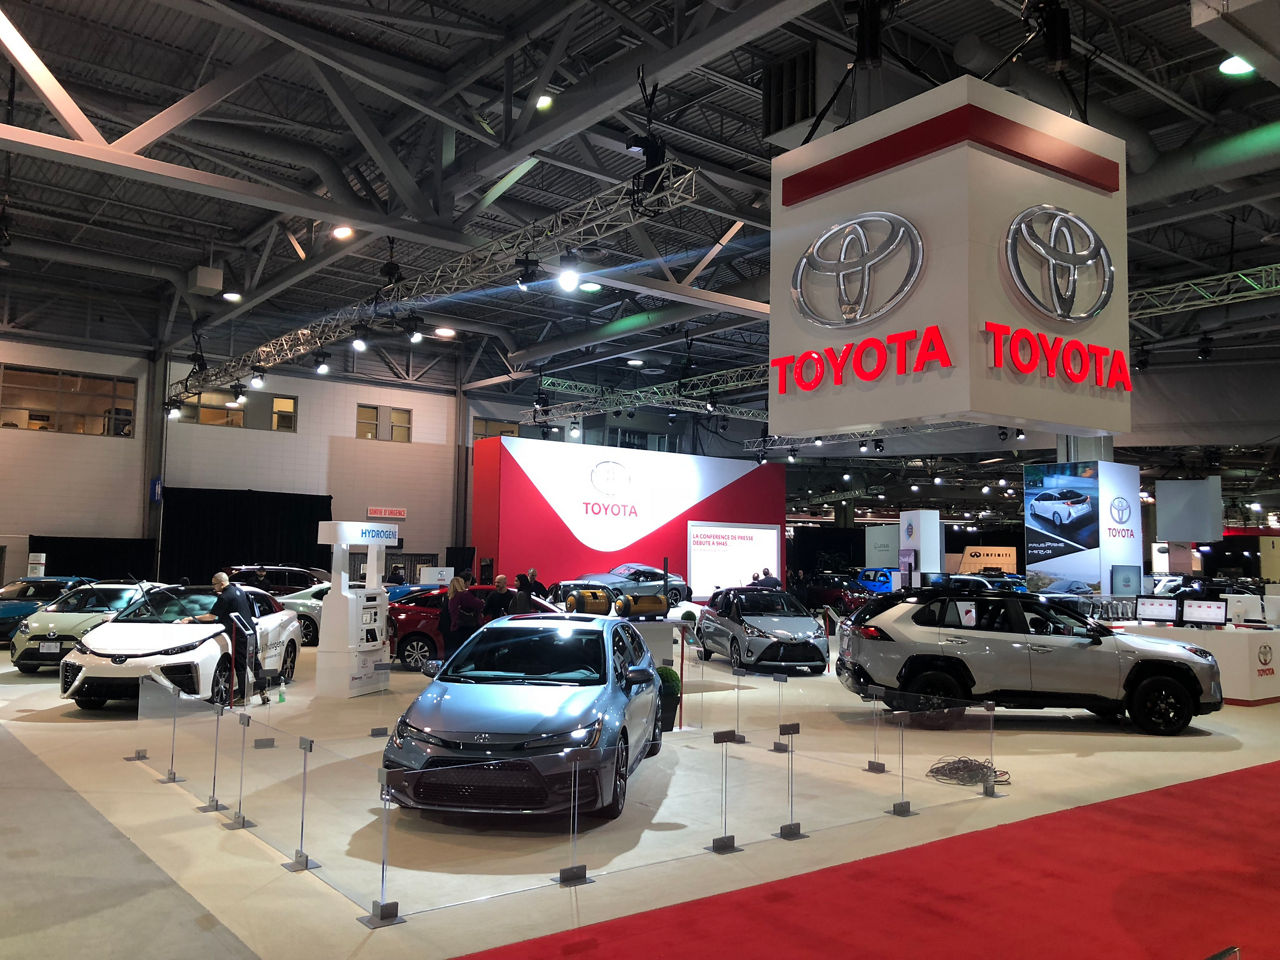 The Toyota Exhibit At The Quebec City International Auto Show